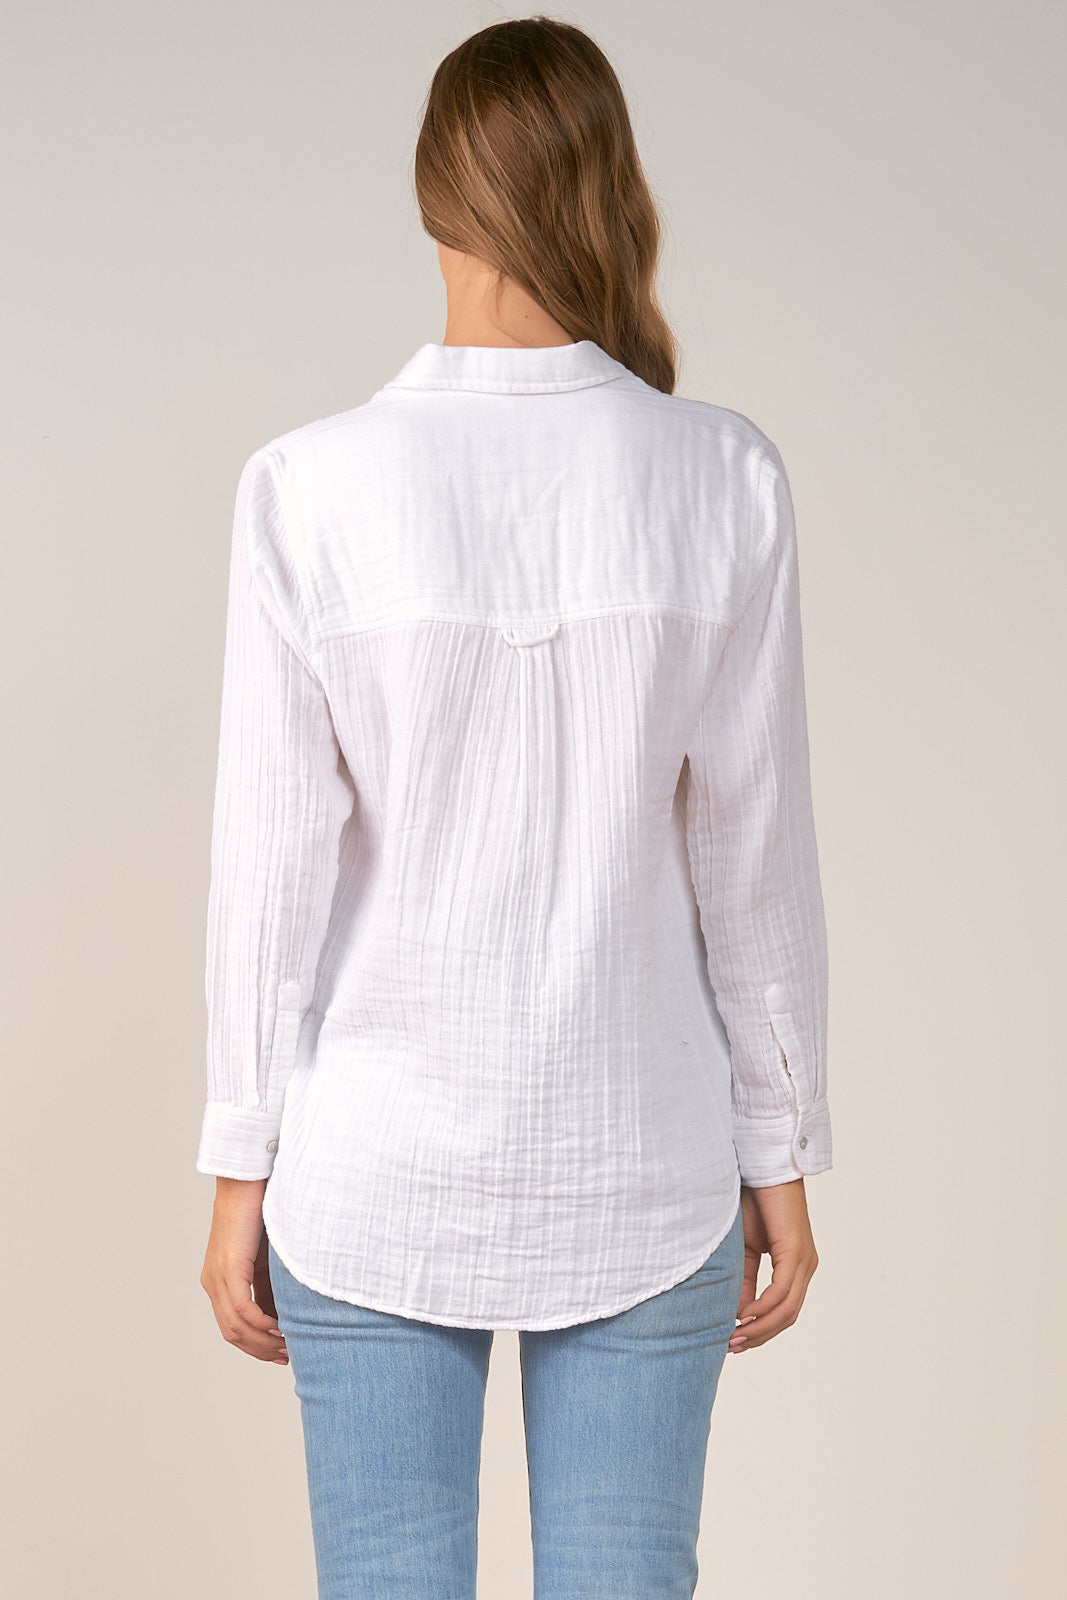 SUMMER'S END BLOUSE